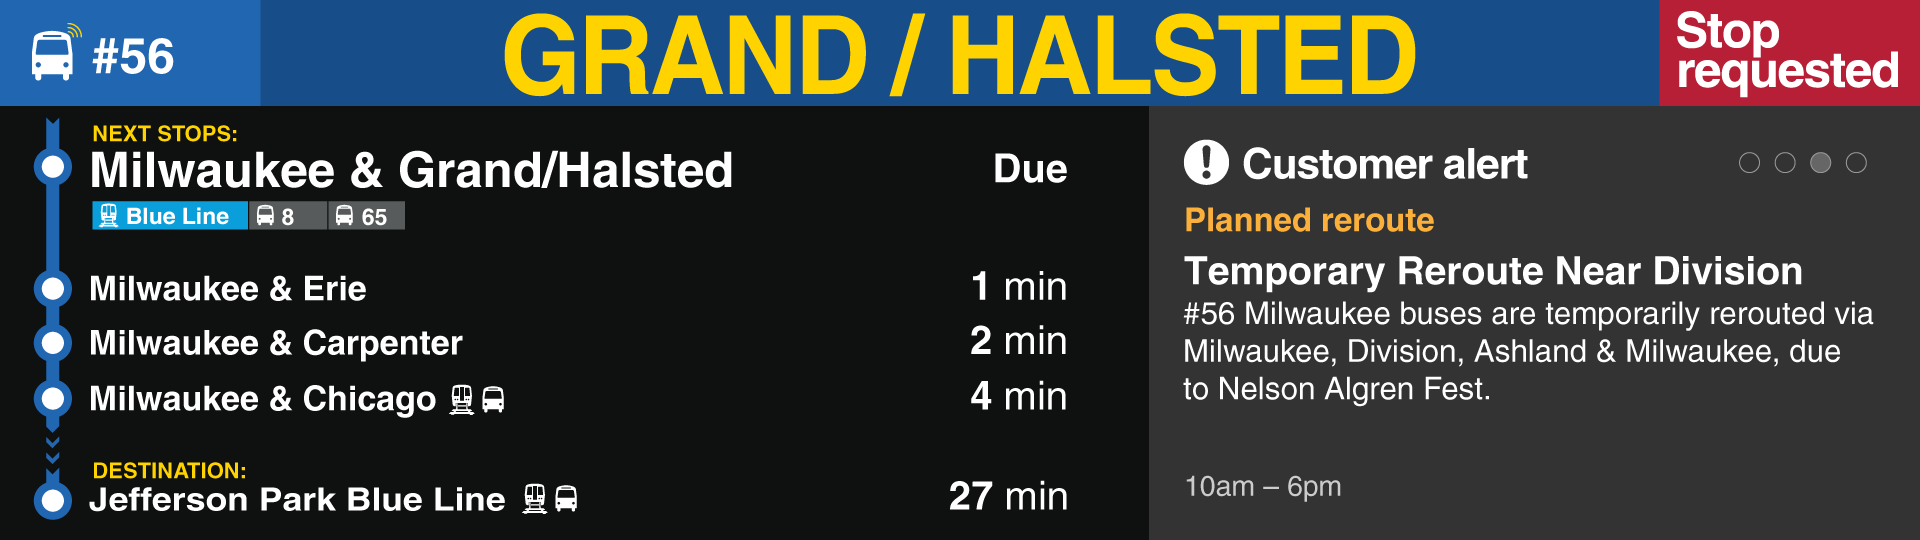 Sample of screen showing a bus in service on the 56, approaching Grand/Milwaukee, available transfers, subsequent stops, a customer alert about a reroute further ahead and that the next stop has been requested.